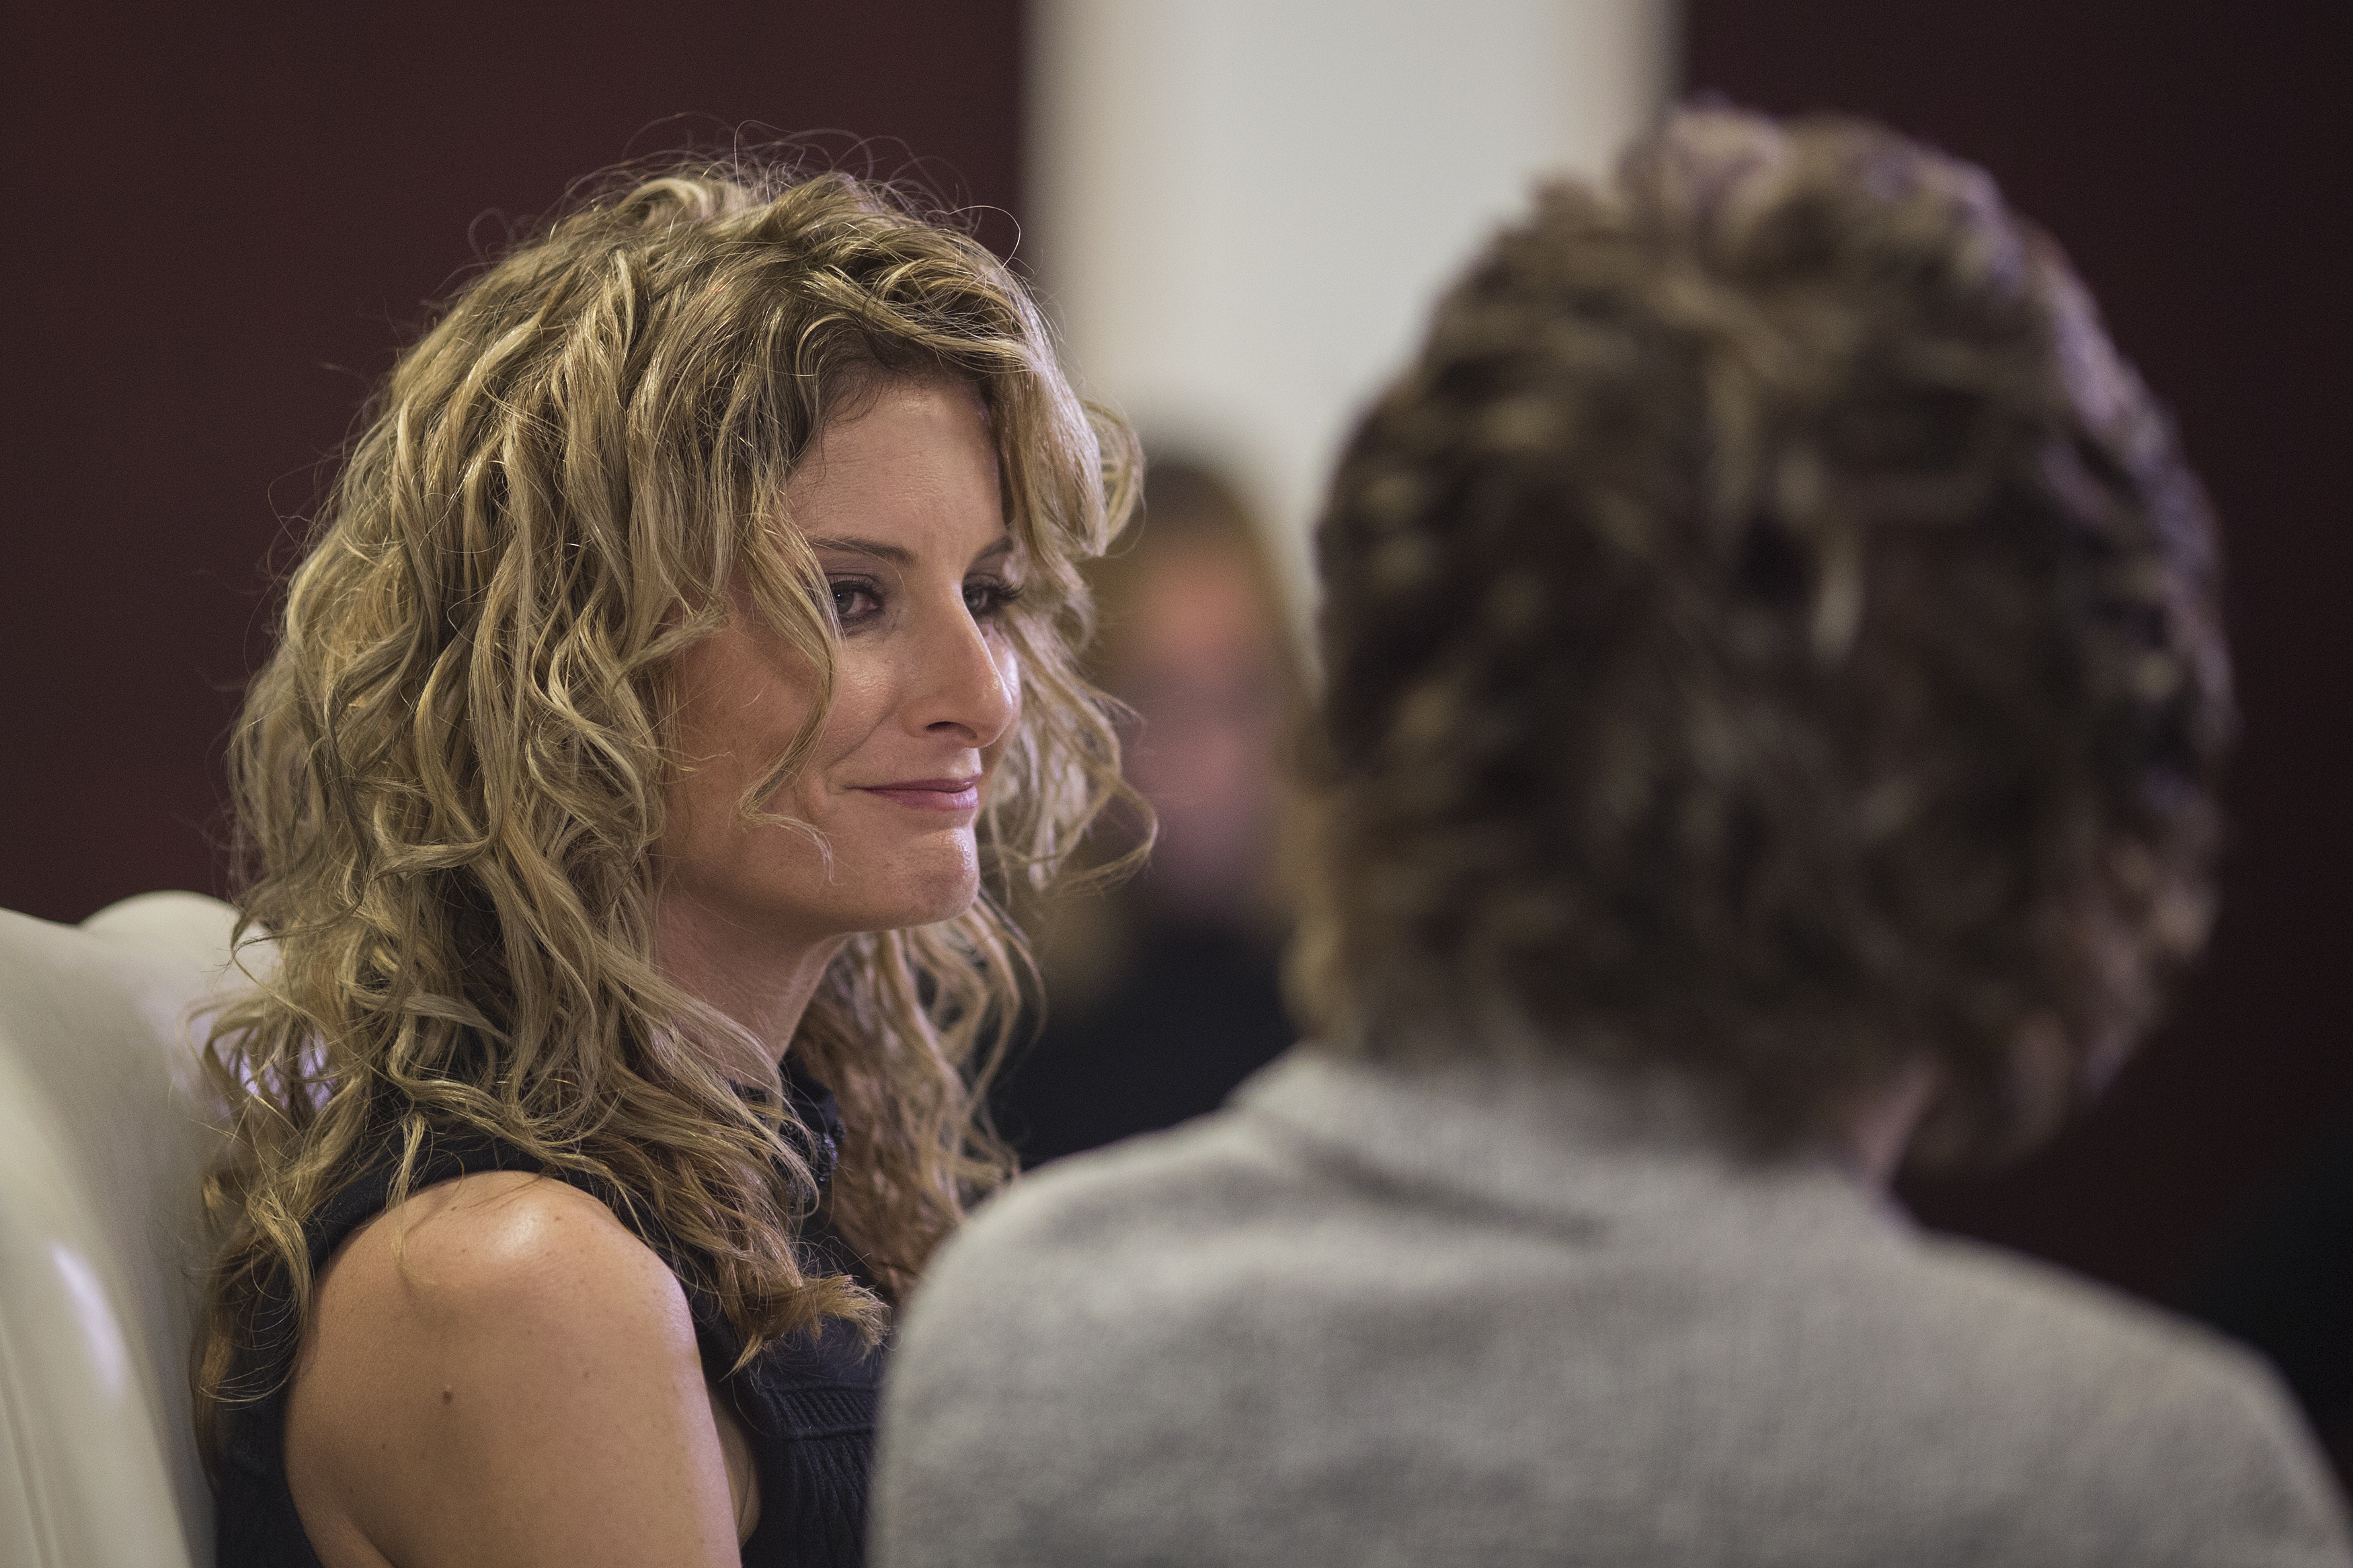 Summer Zervos attends a press conference with attorney Gloria Allred (L) to announce their defamation lawsuit against President-elect Donald Trump  on January 17, 2017 in Los Angeles, California. (David McNew&mdash;Getty Images)